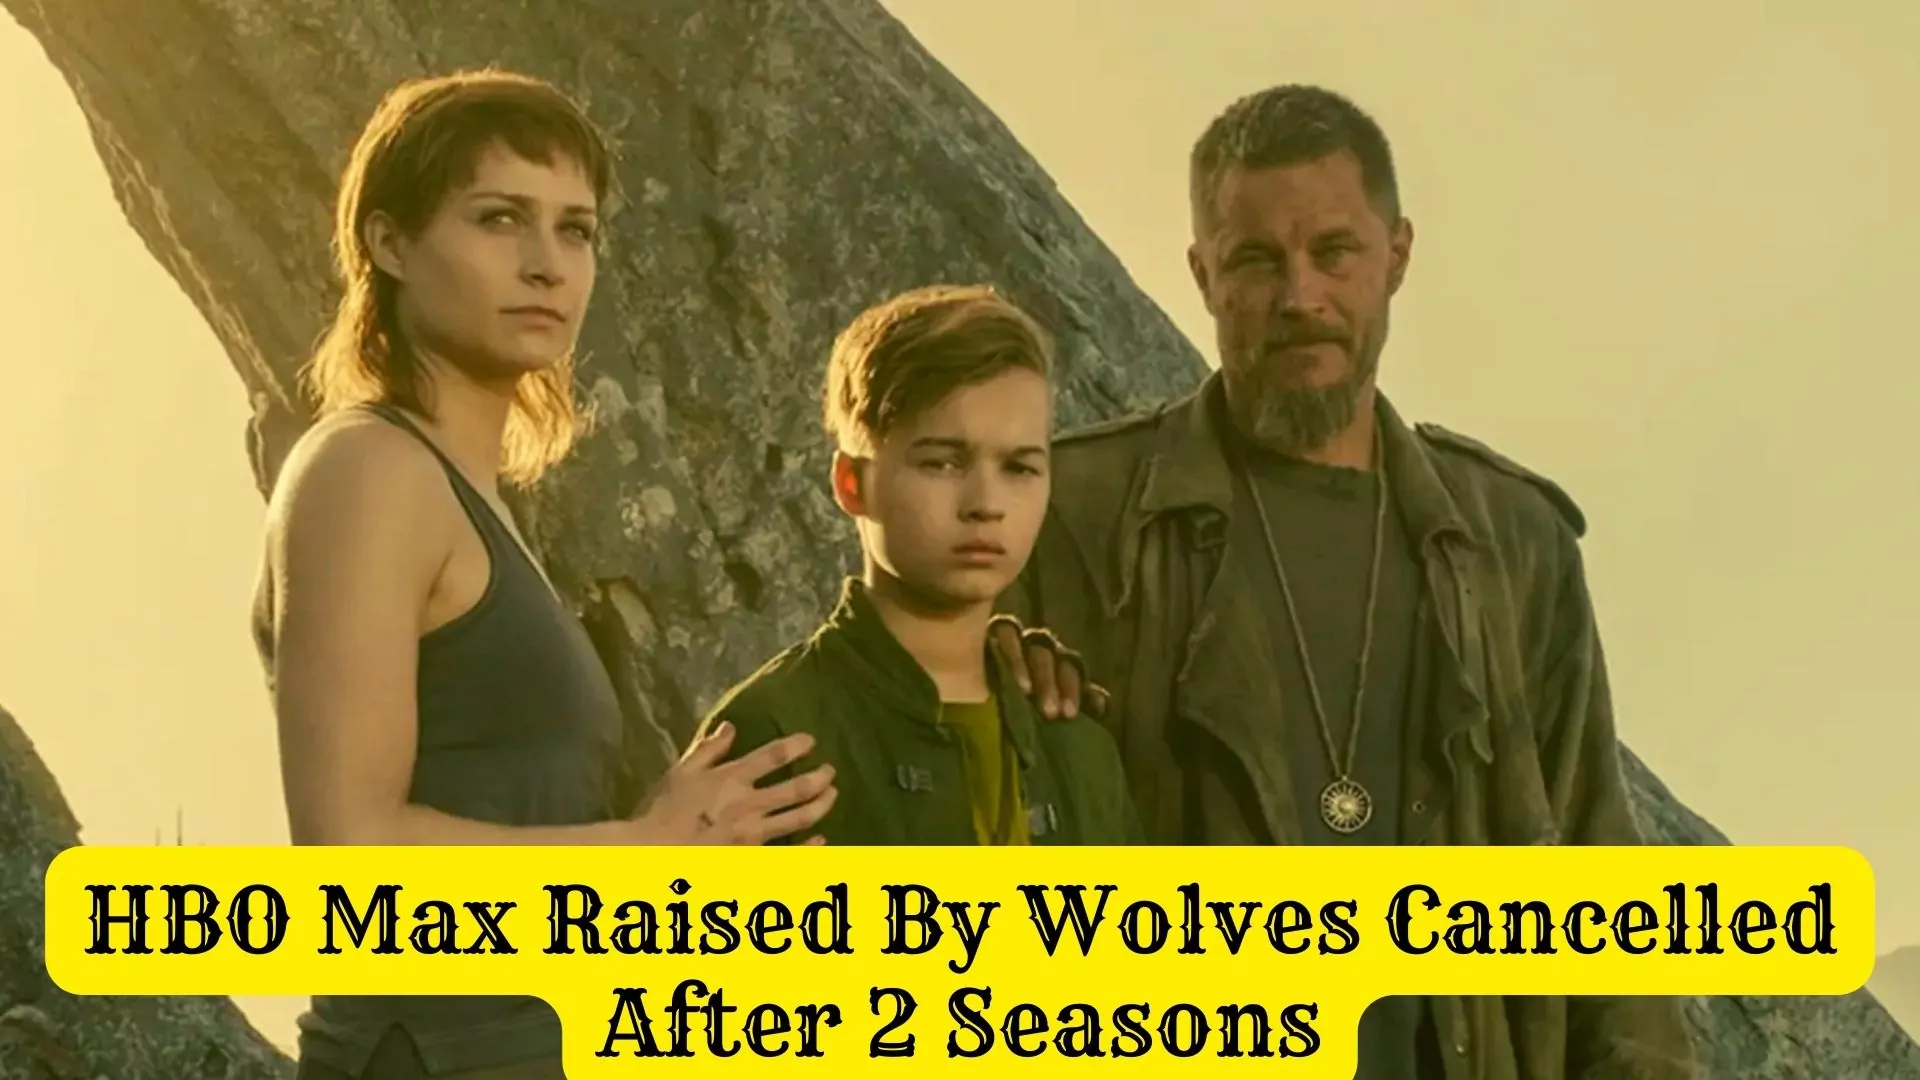 HBO Max Raised By Wolves Cancelled After 2 Seasons